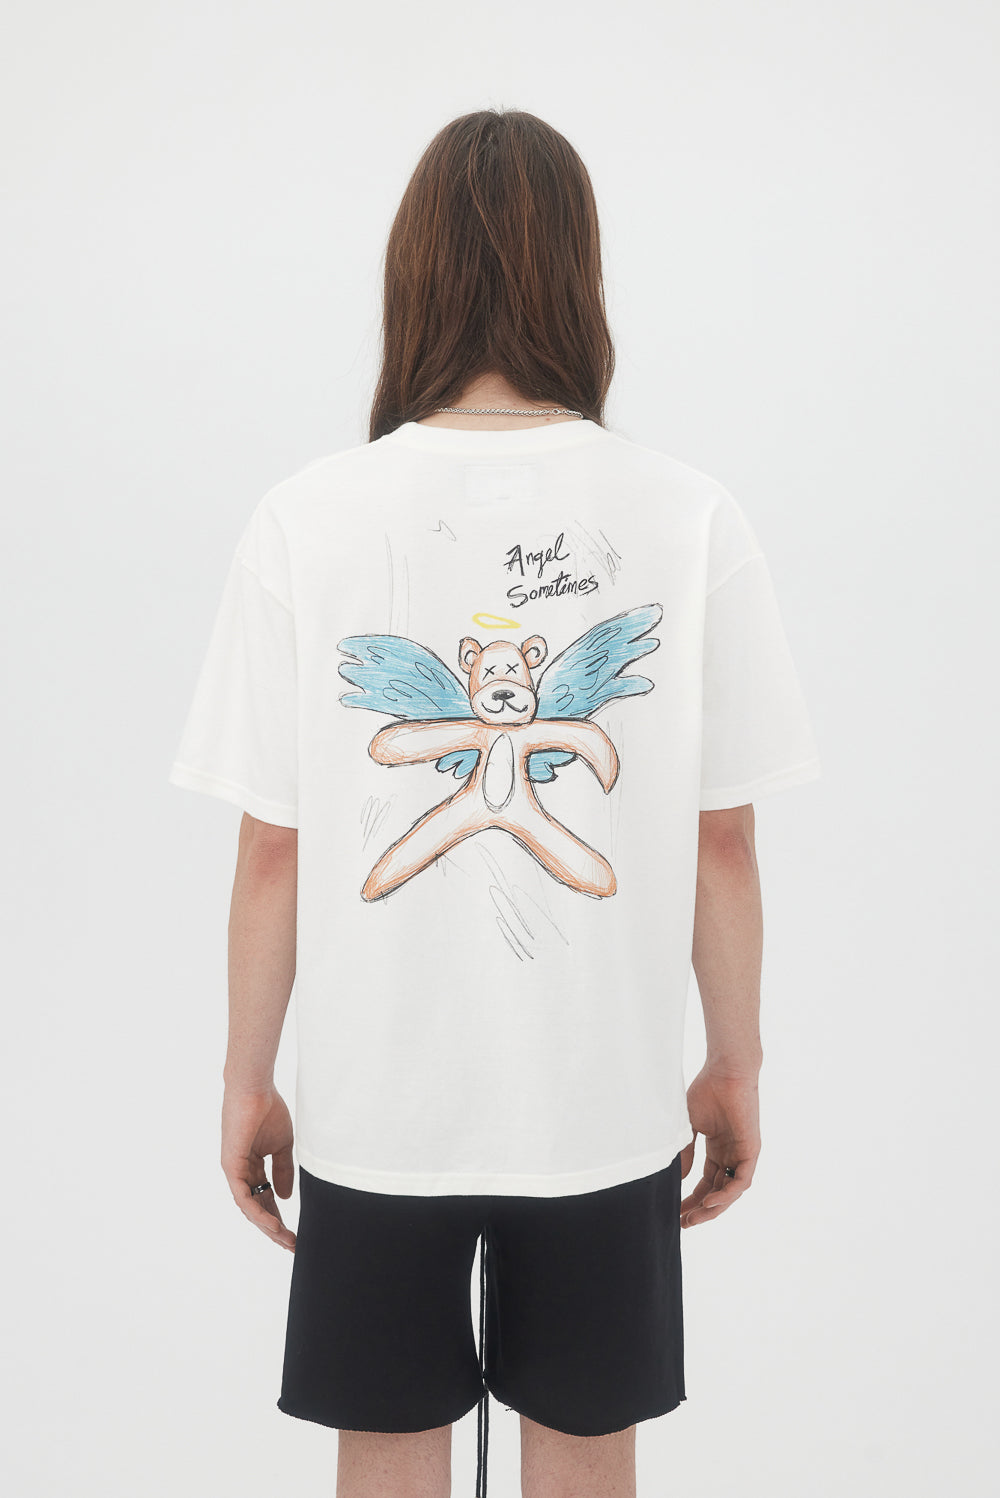 Buy the Domrebel Angelbear T-Shirt in Ivory at Intro. Spend £50 for free UK delivery. Official stockists. We ship worldwide.